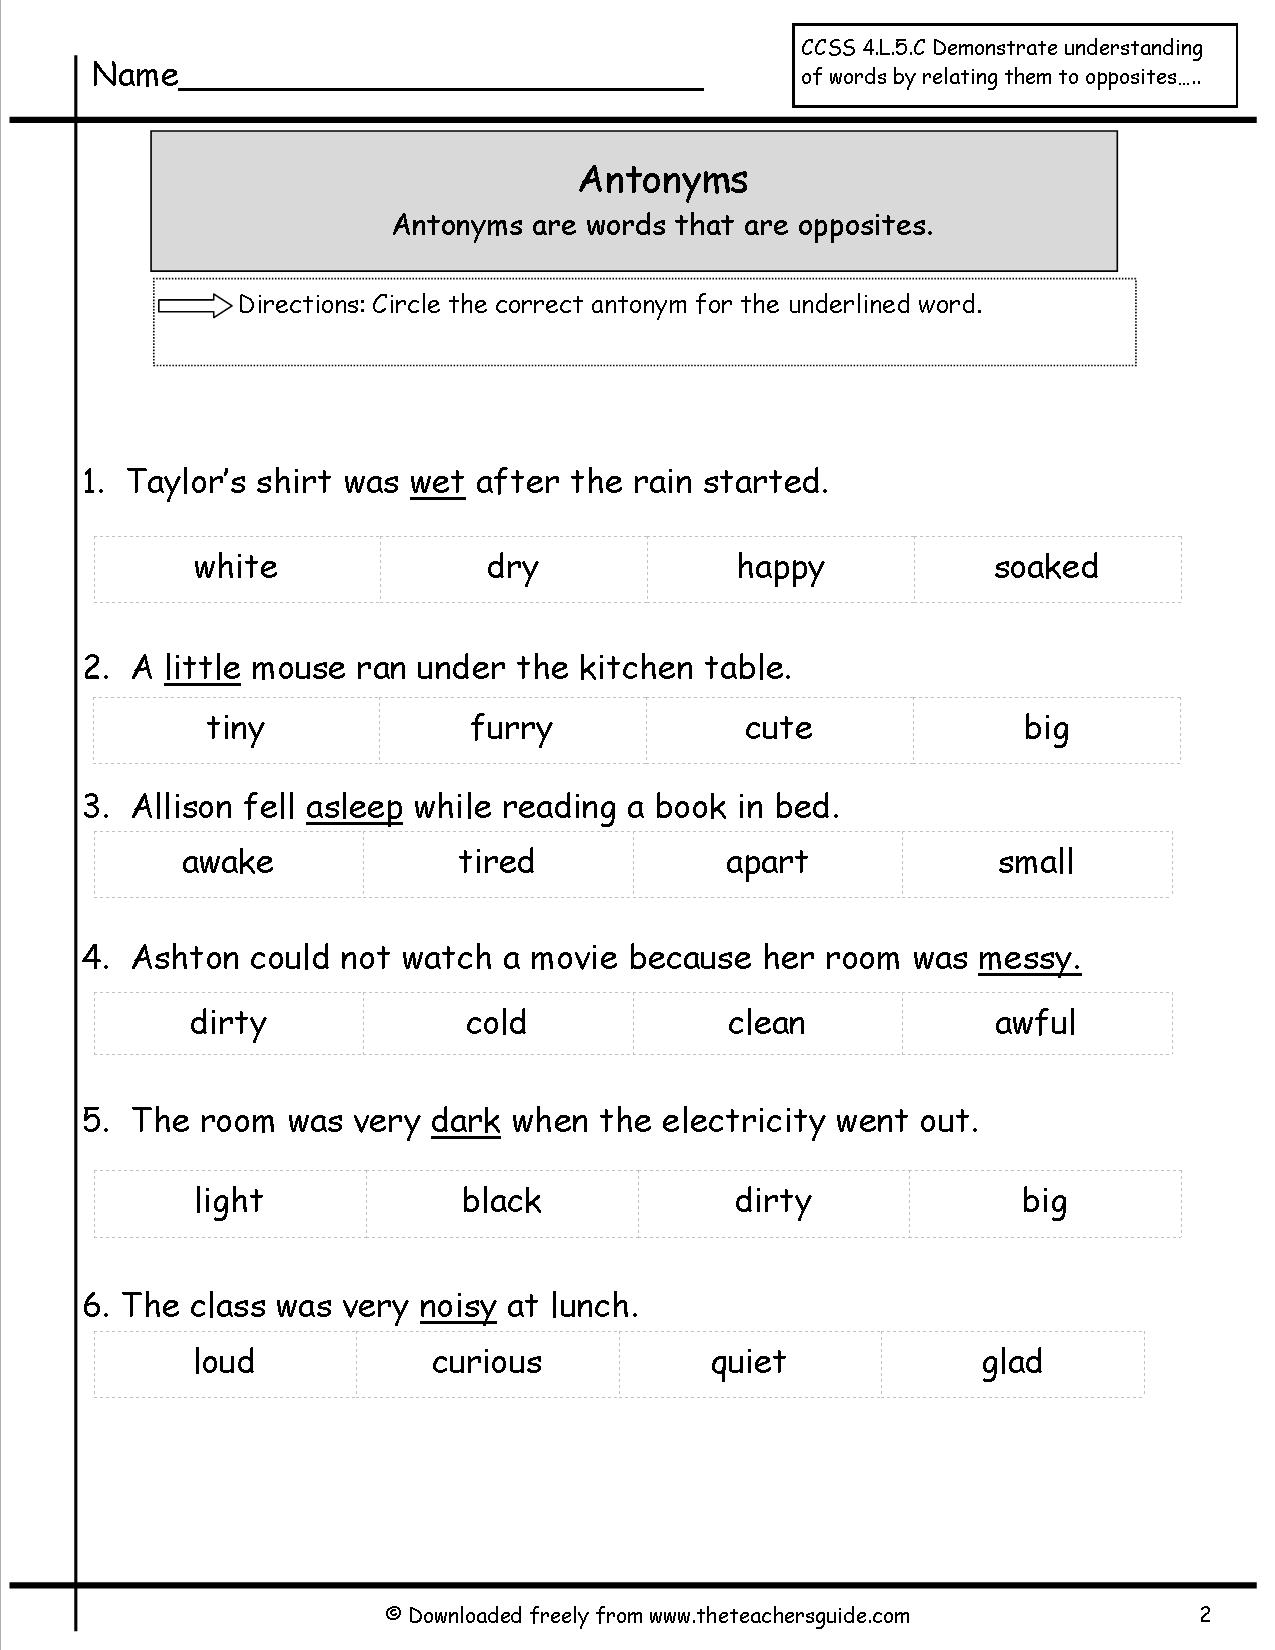 9 Best Images of Synonyms Worksheets For Third Grade - Synonym